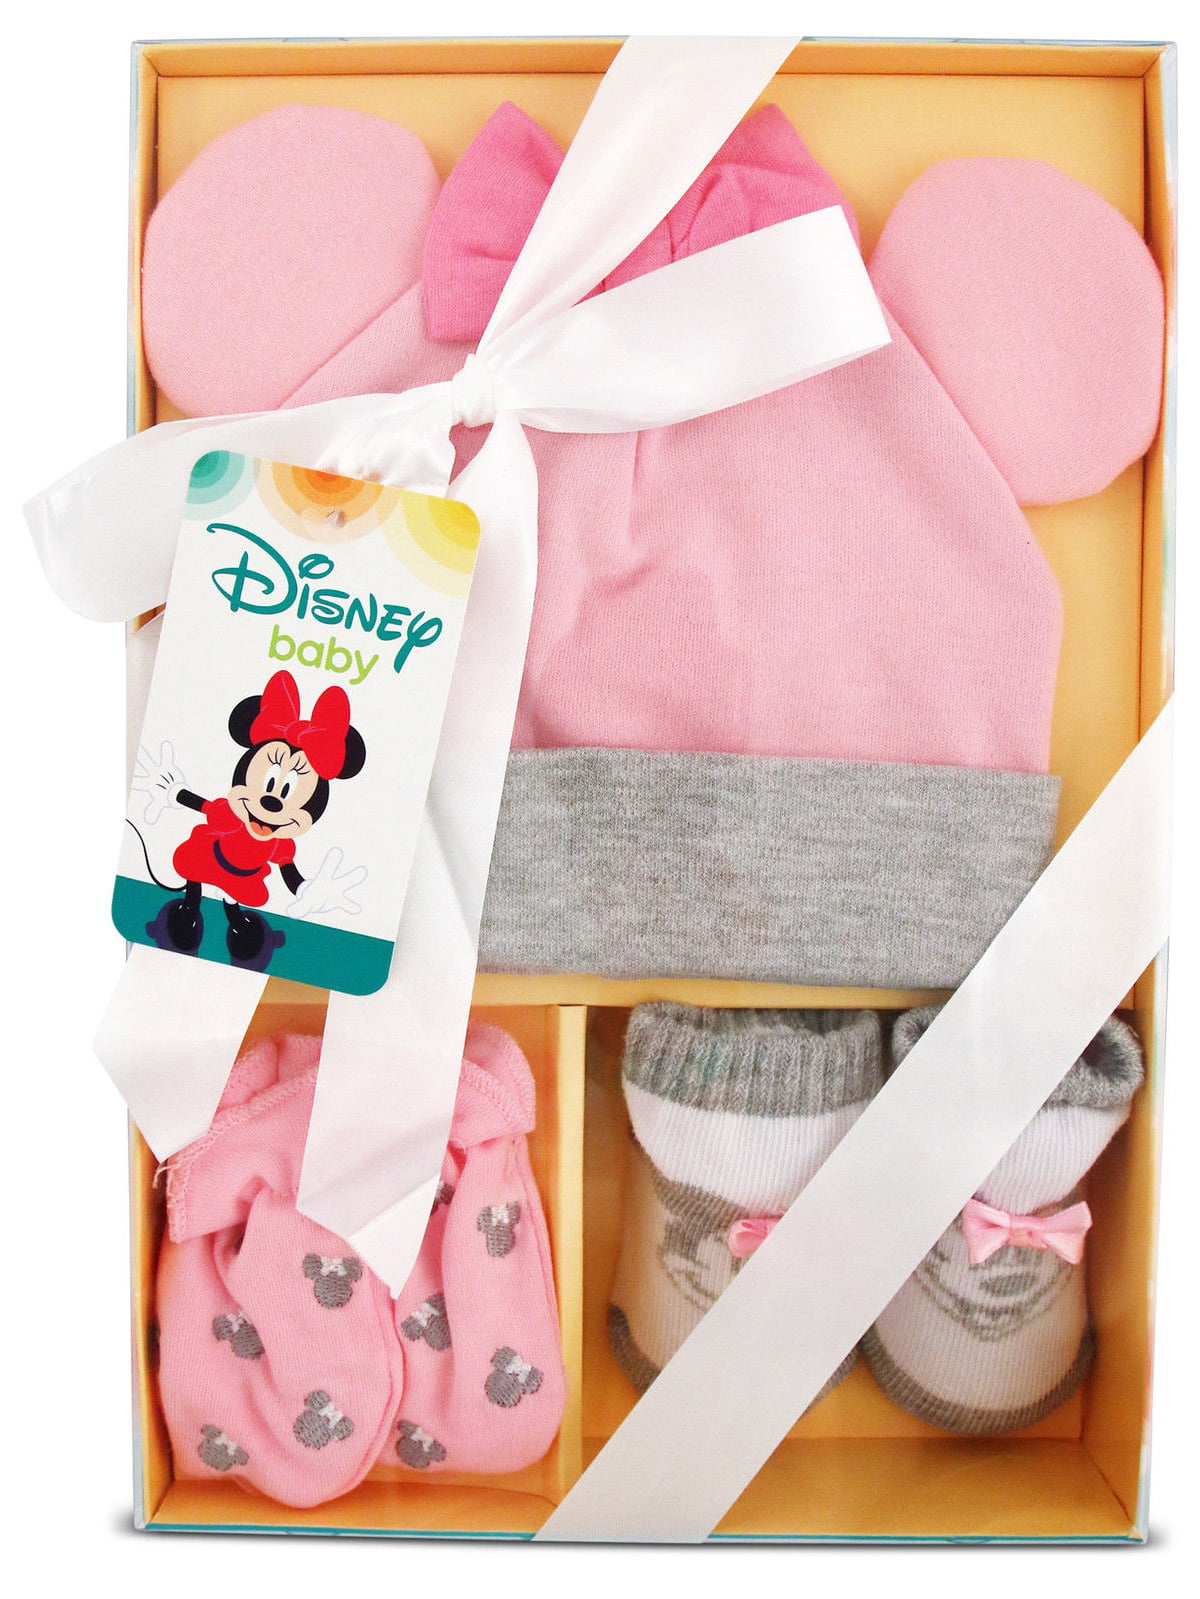 Disney Minnie Mouse Hat, Mitts and Socks Take Me Home Gift Set, Baby Girls,  0-3M